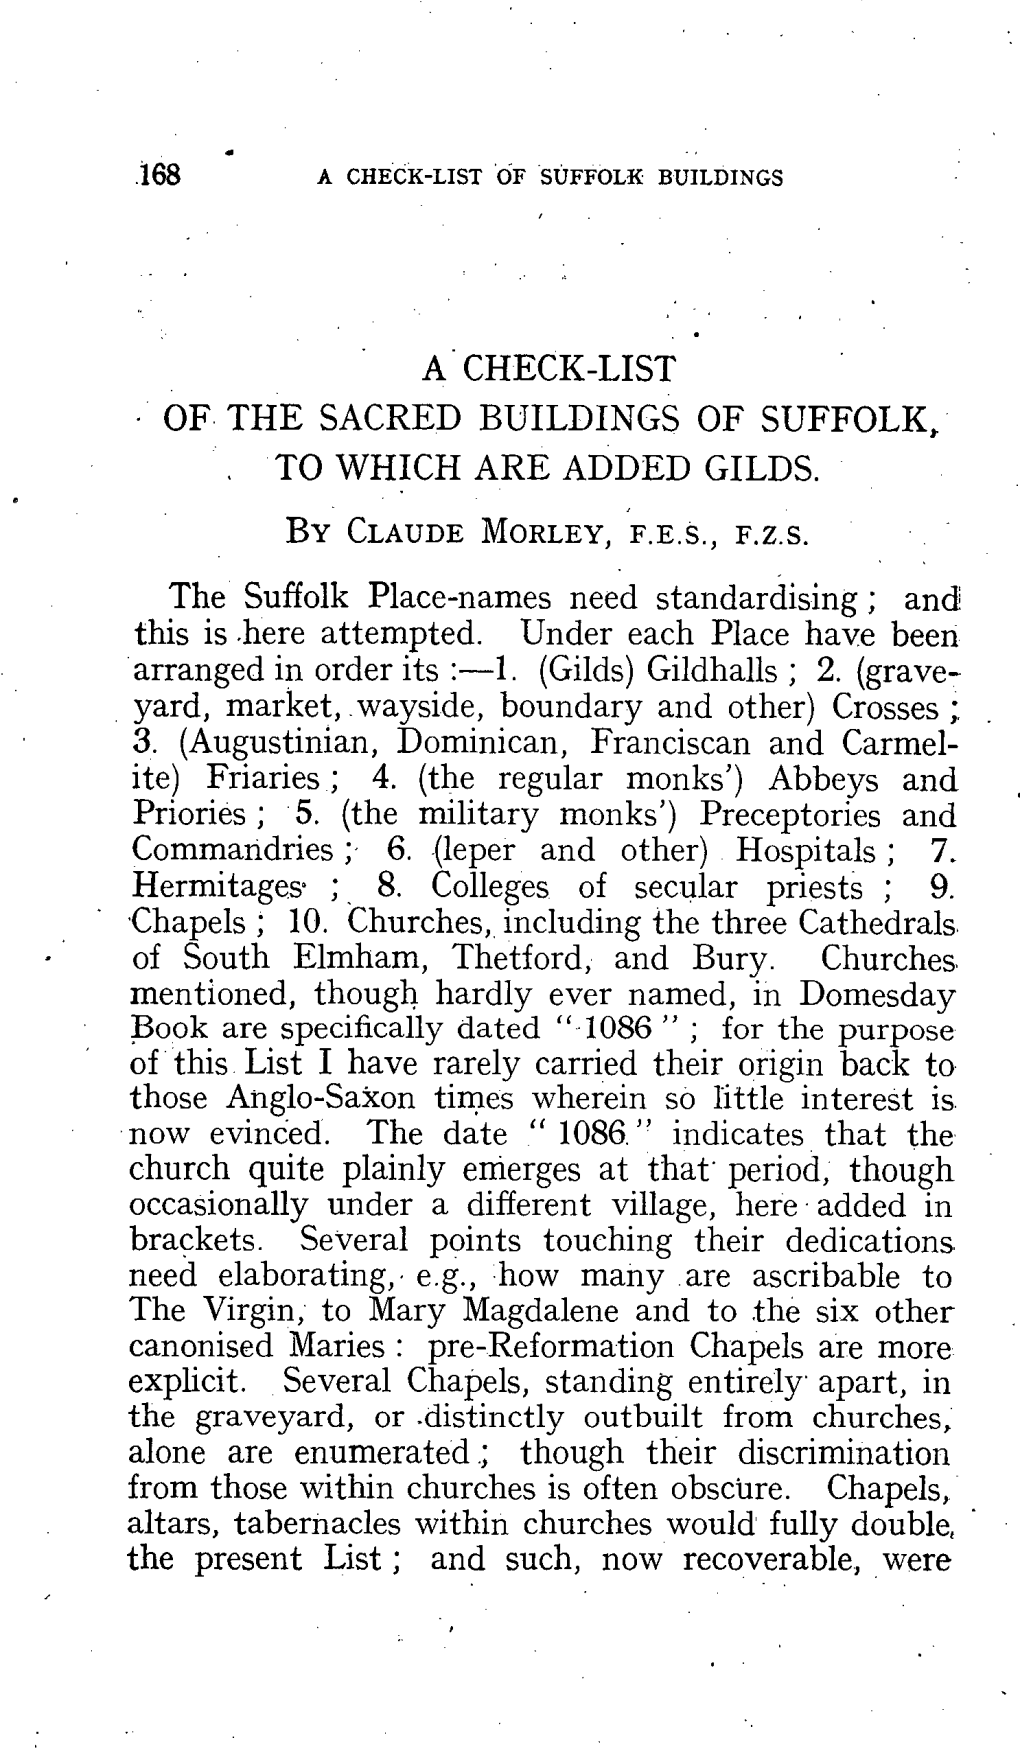 A Check-List of the Sacred Buildings of Suffolk, to Which